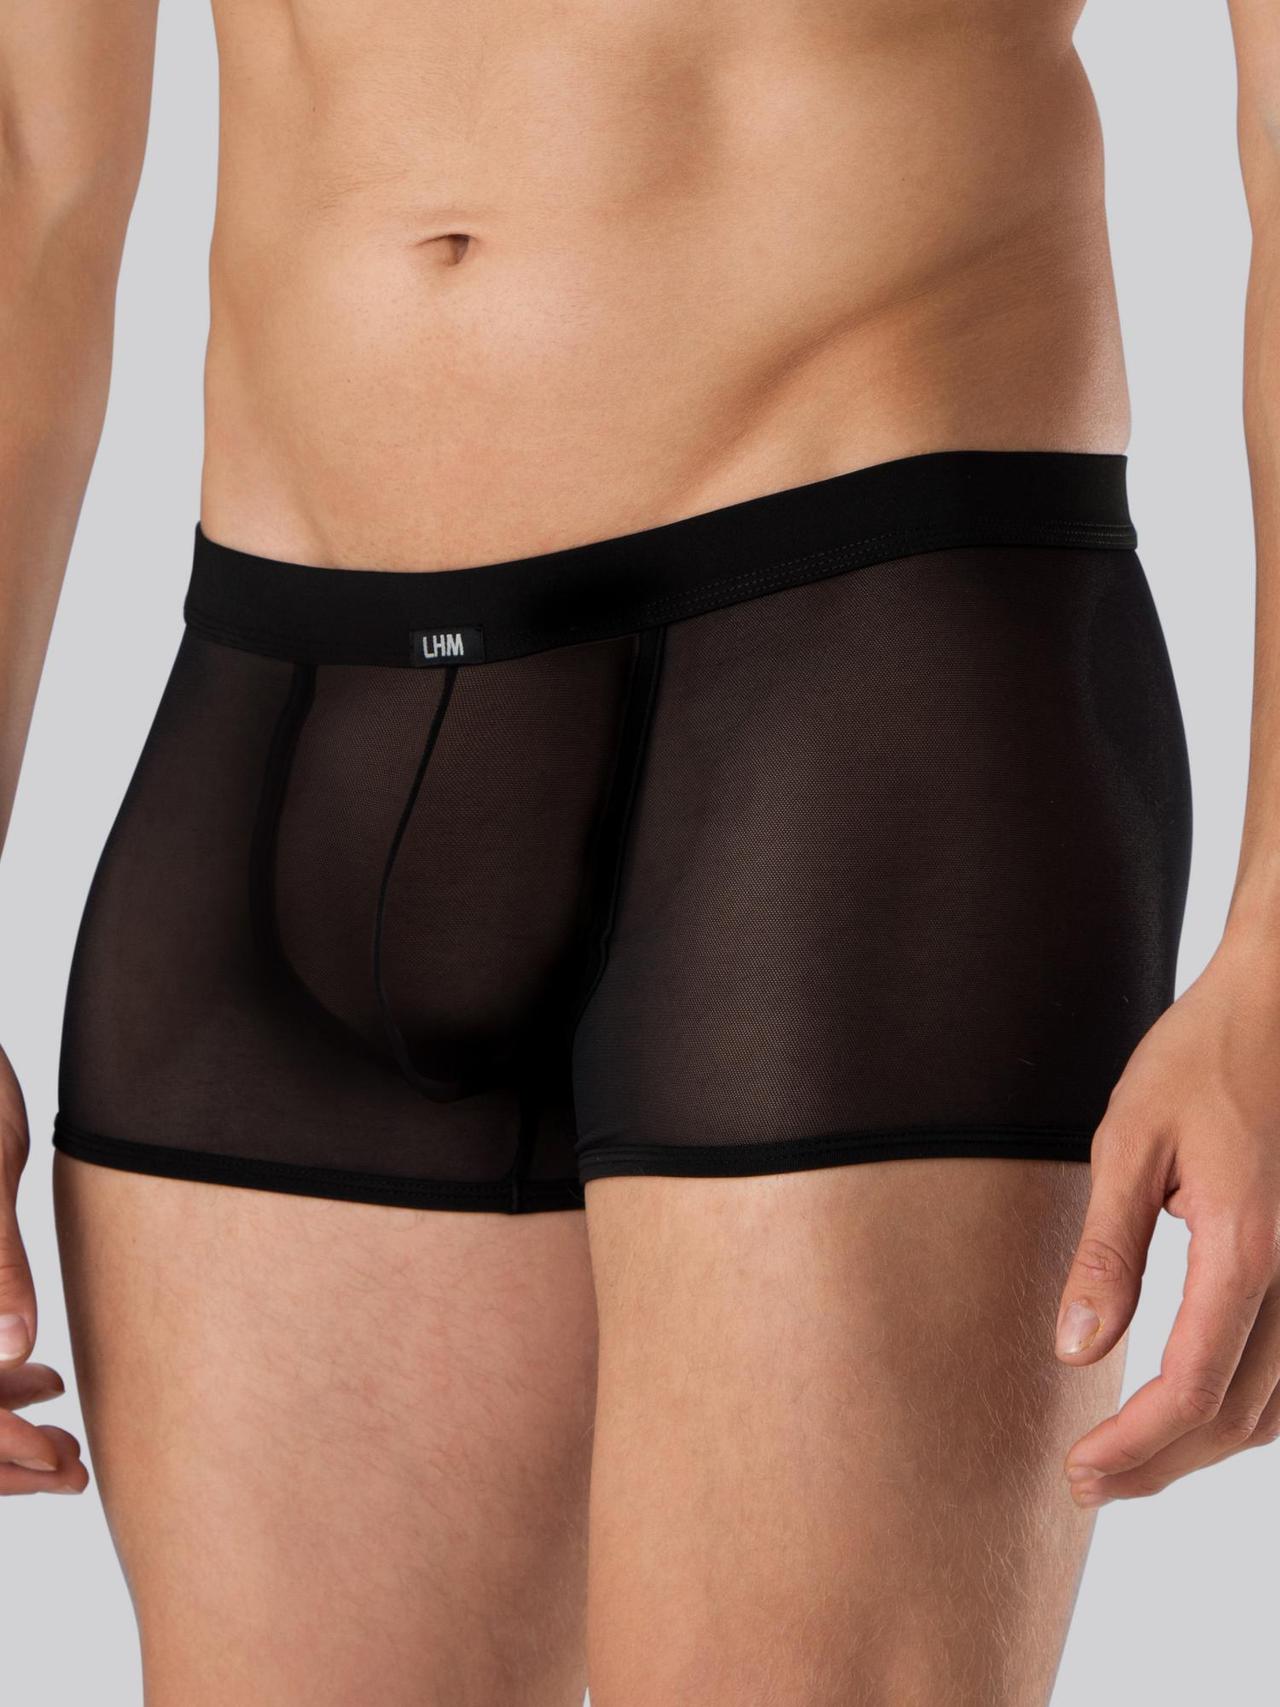 What Are the Tips to Groom Better With Men's Thong Underwear?